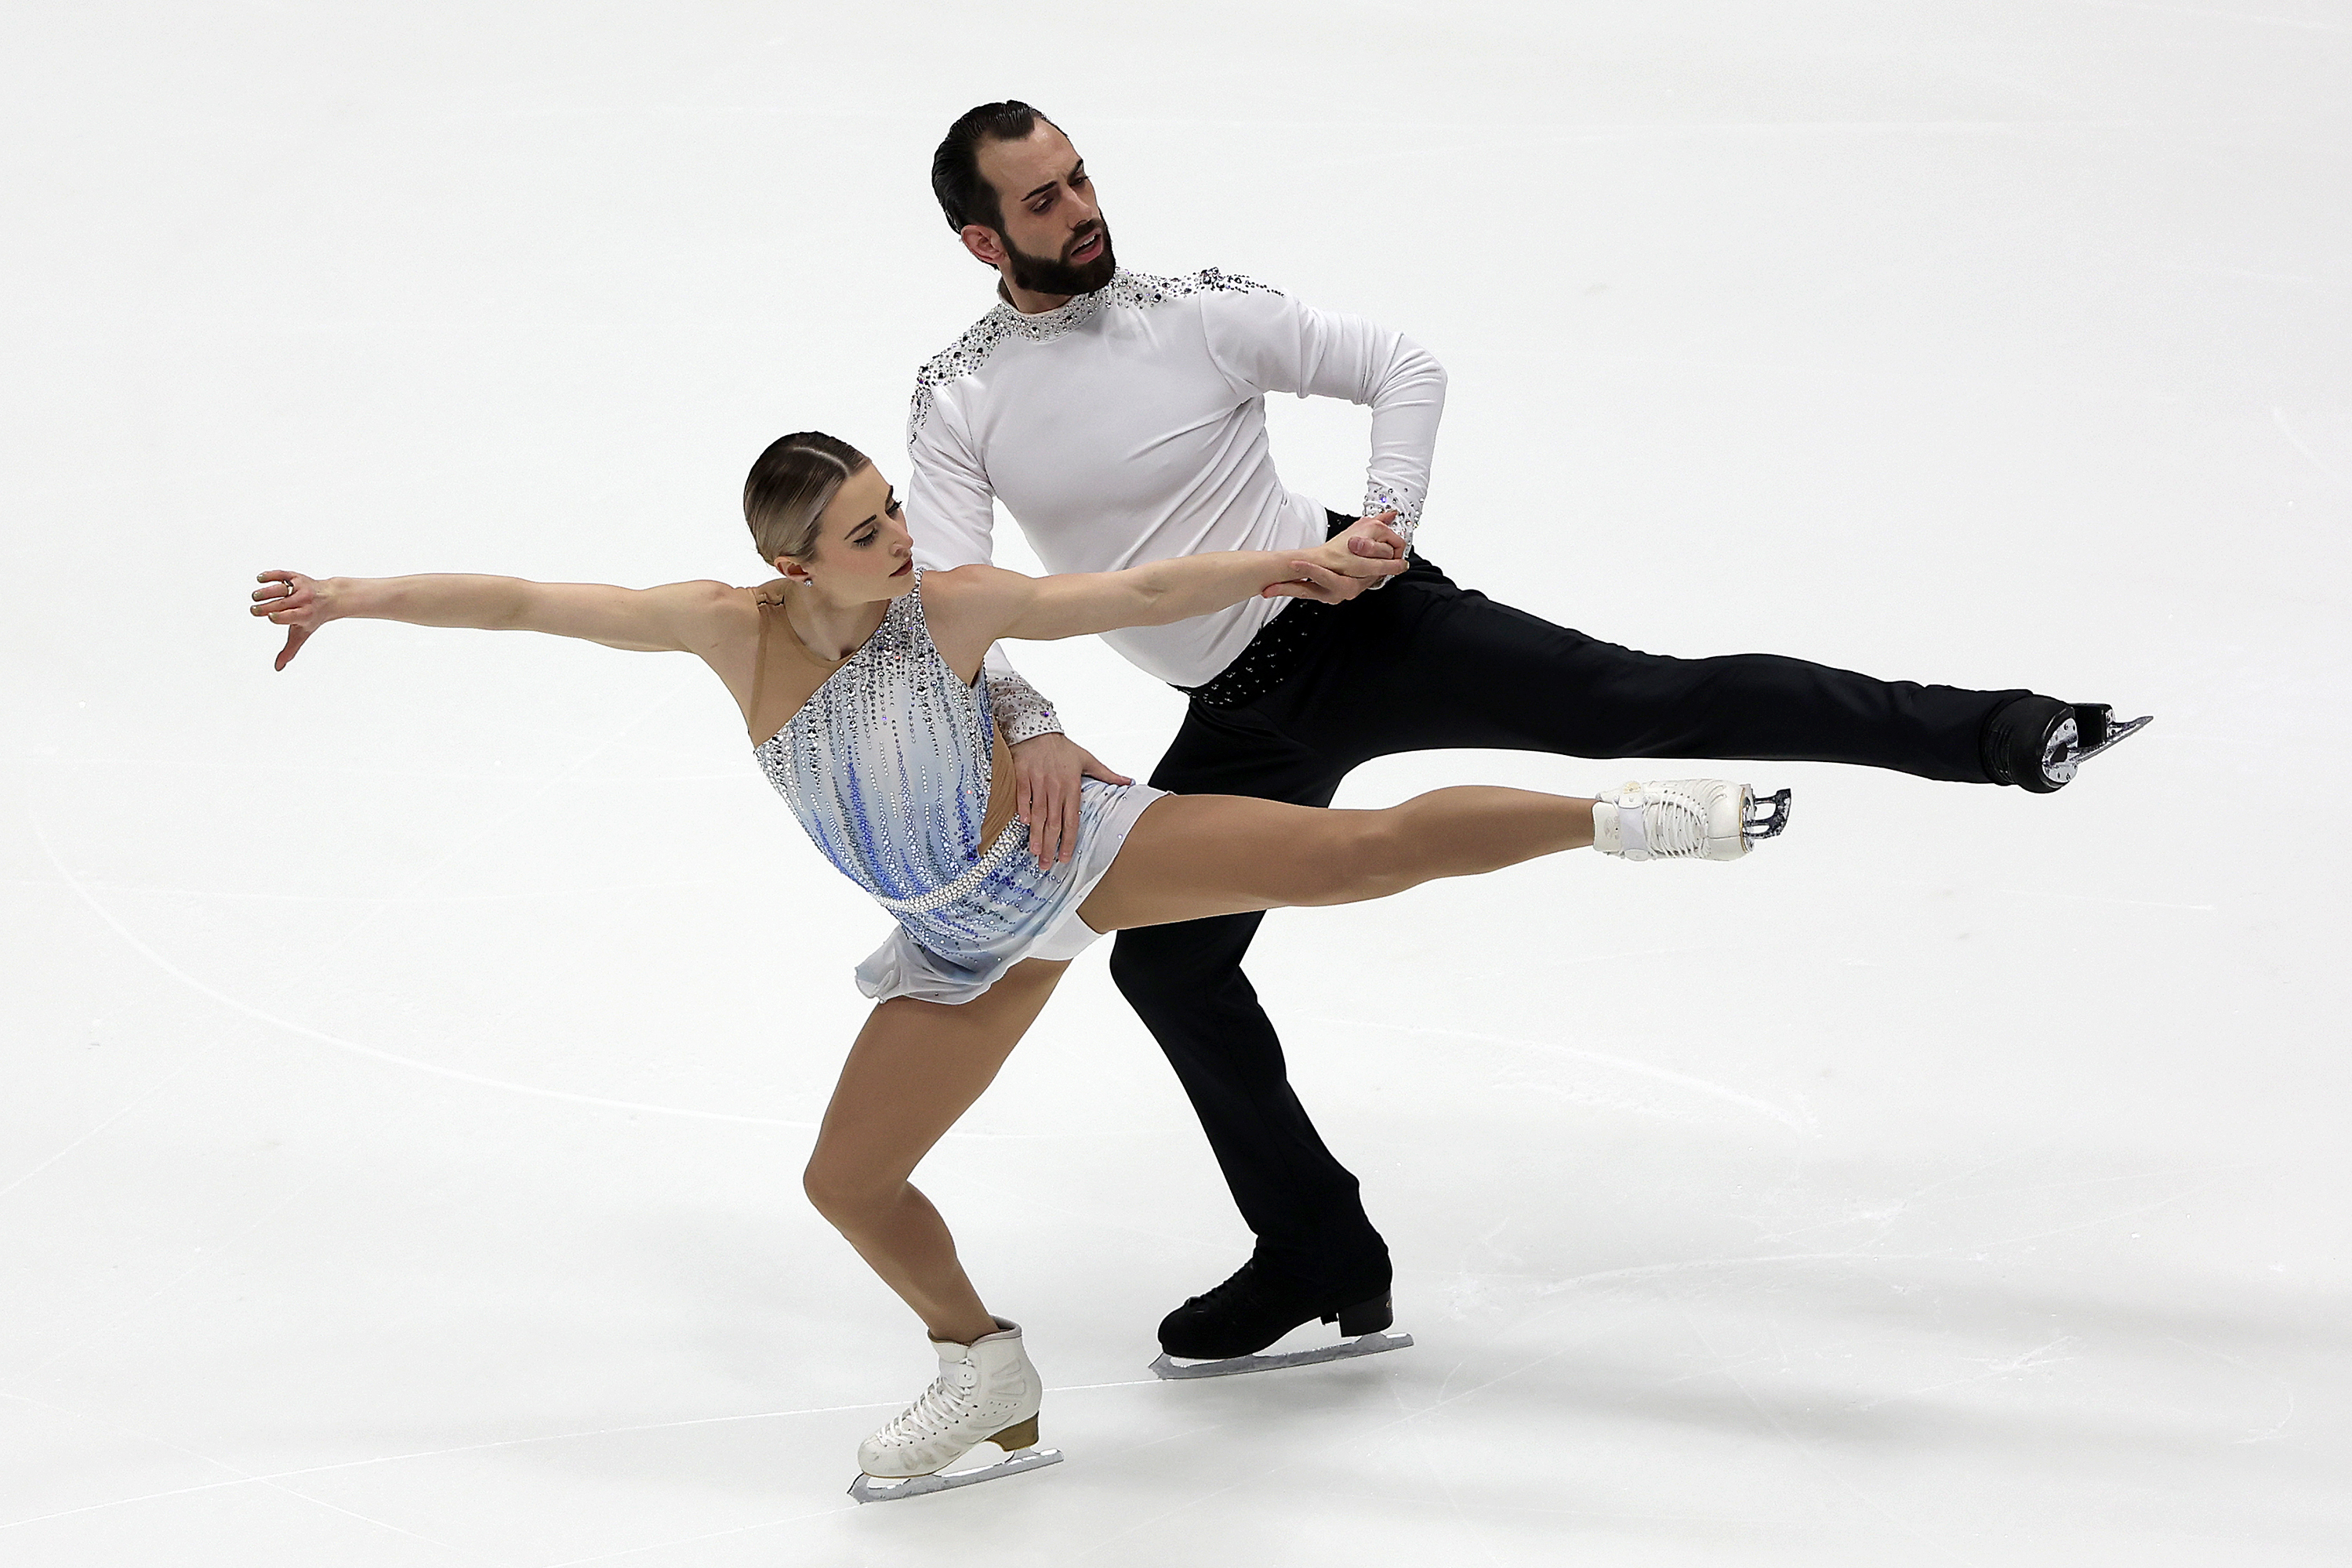 Ashley Cain-Gribble and Timothy LeDuc skate during the US Figure Skating Championships on January 6, in Nashville, Tennessee.